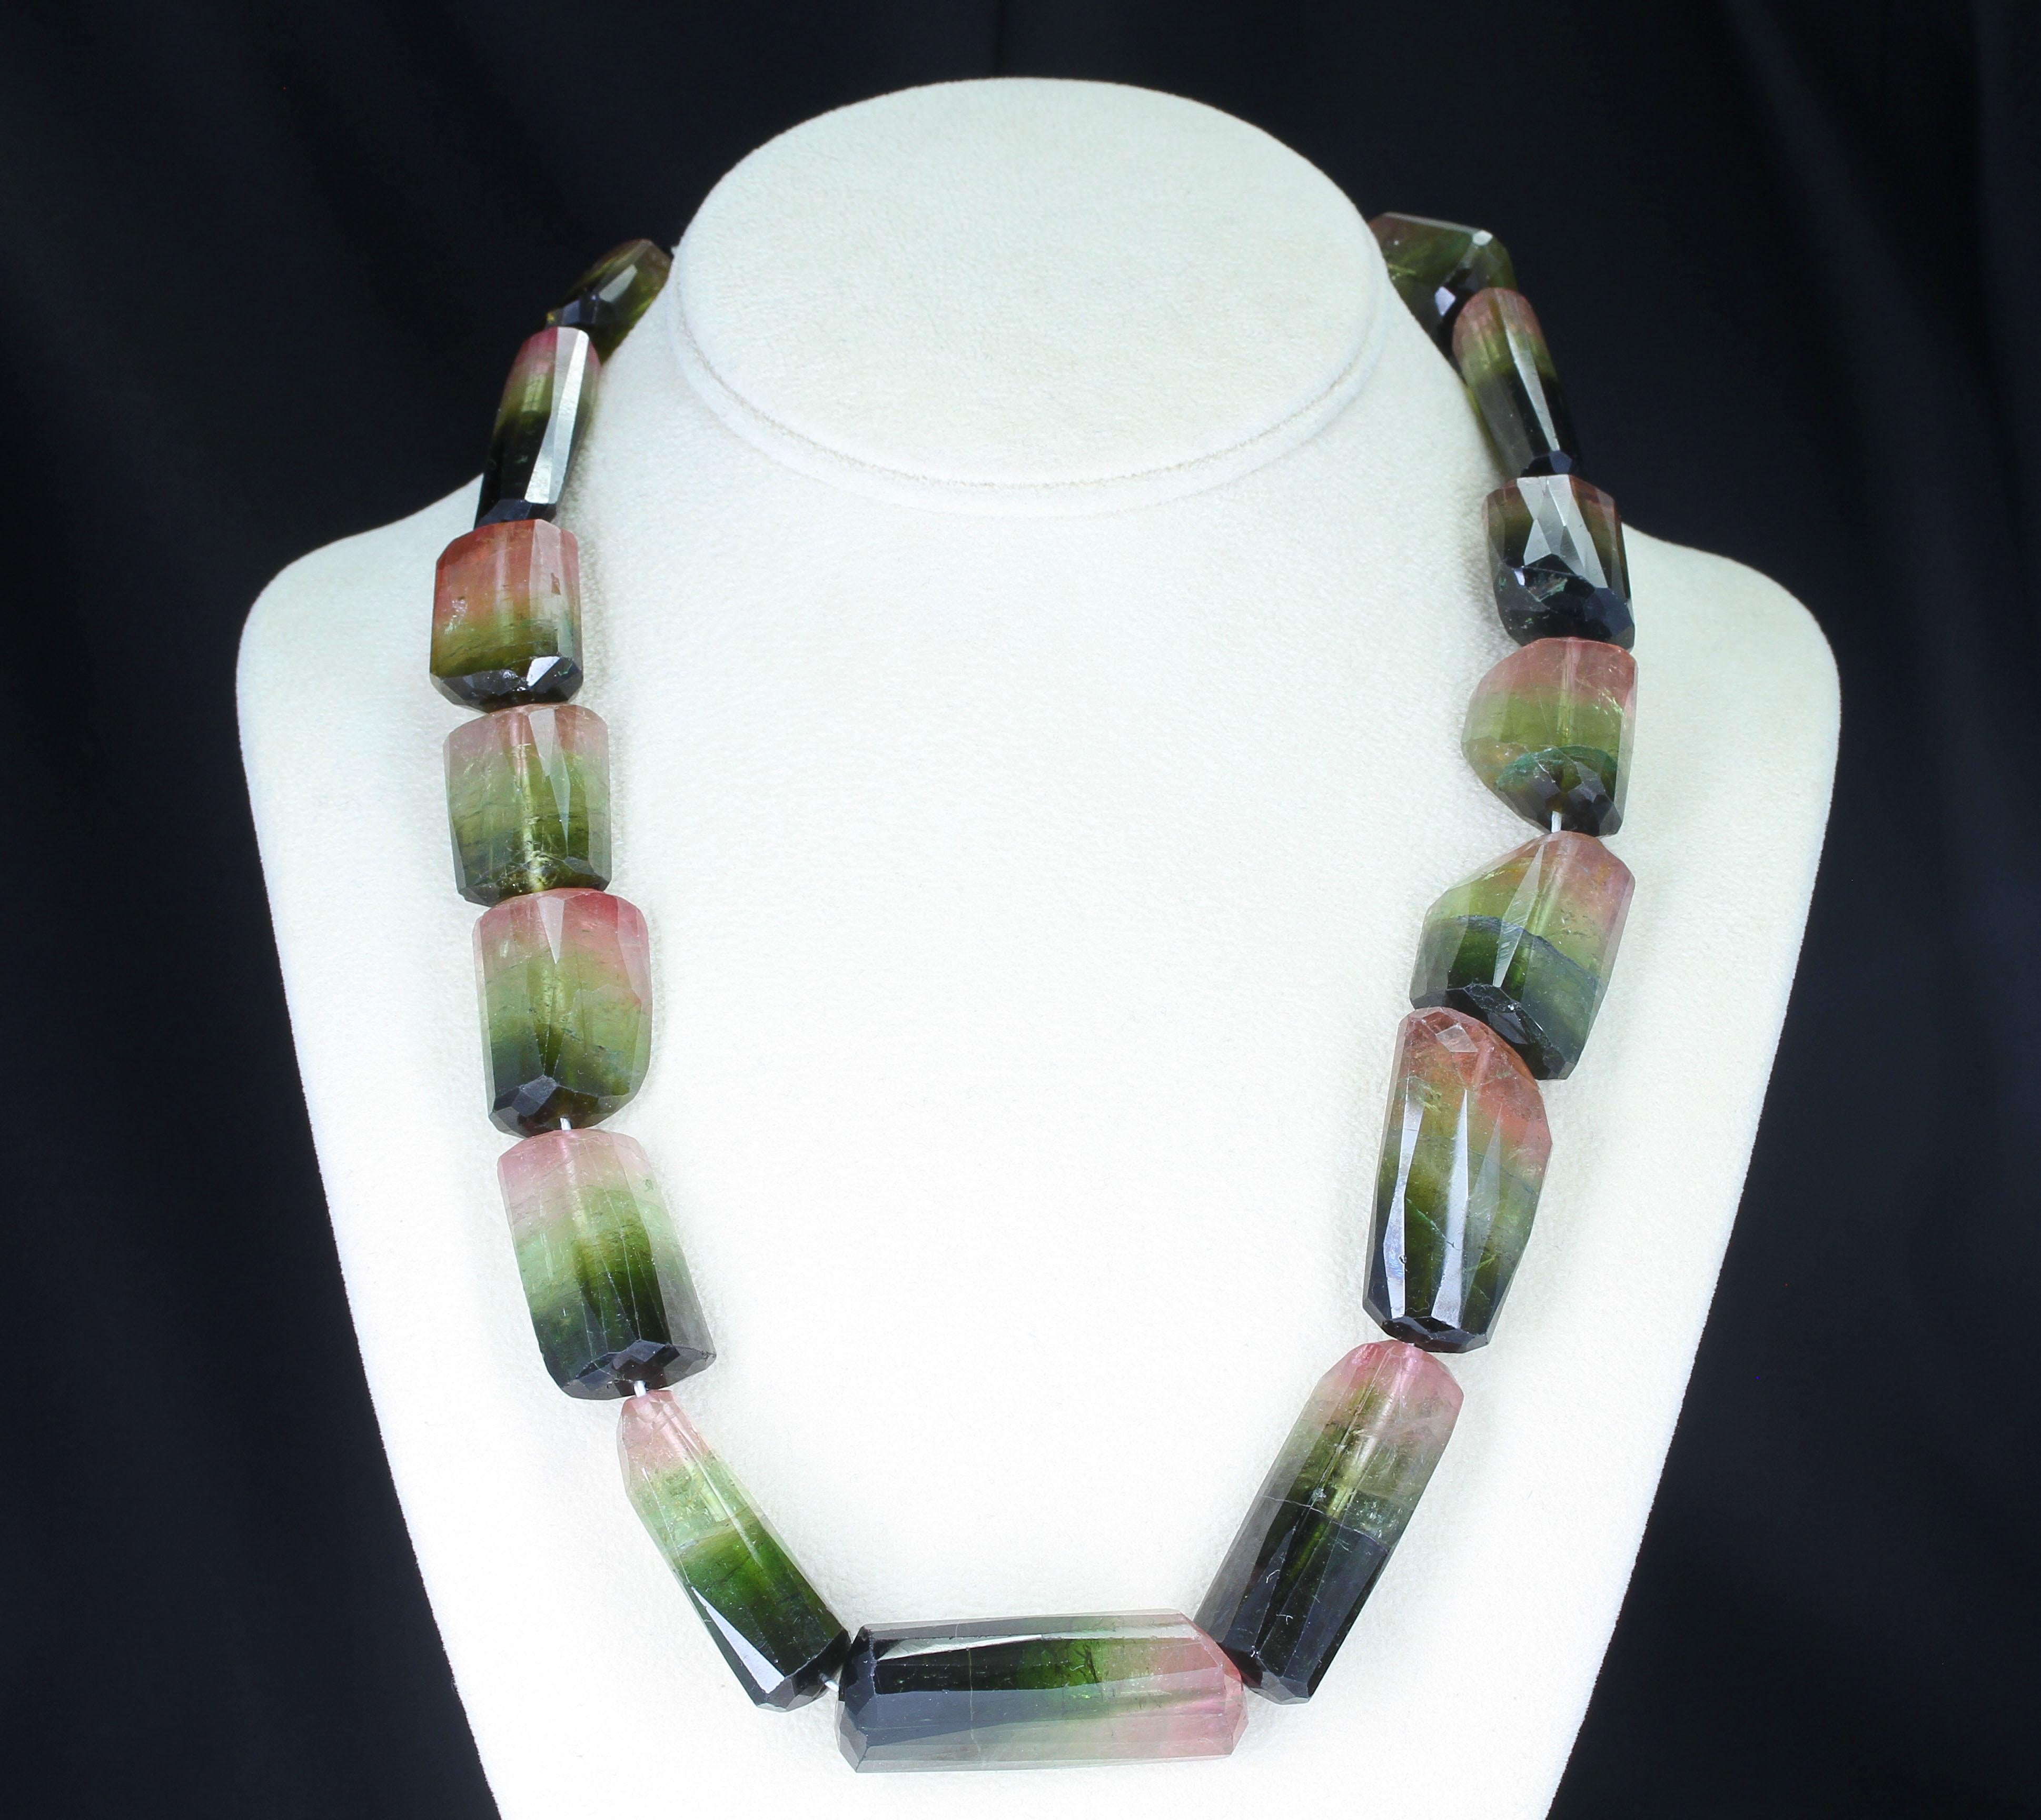 A statement necklace of Large Faceted Rectangular Bi-Color Tourmaline Beads with a Tourmaline Clasp. The length is 21.5